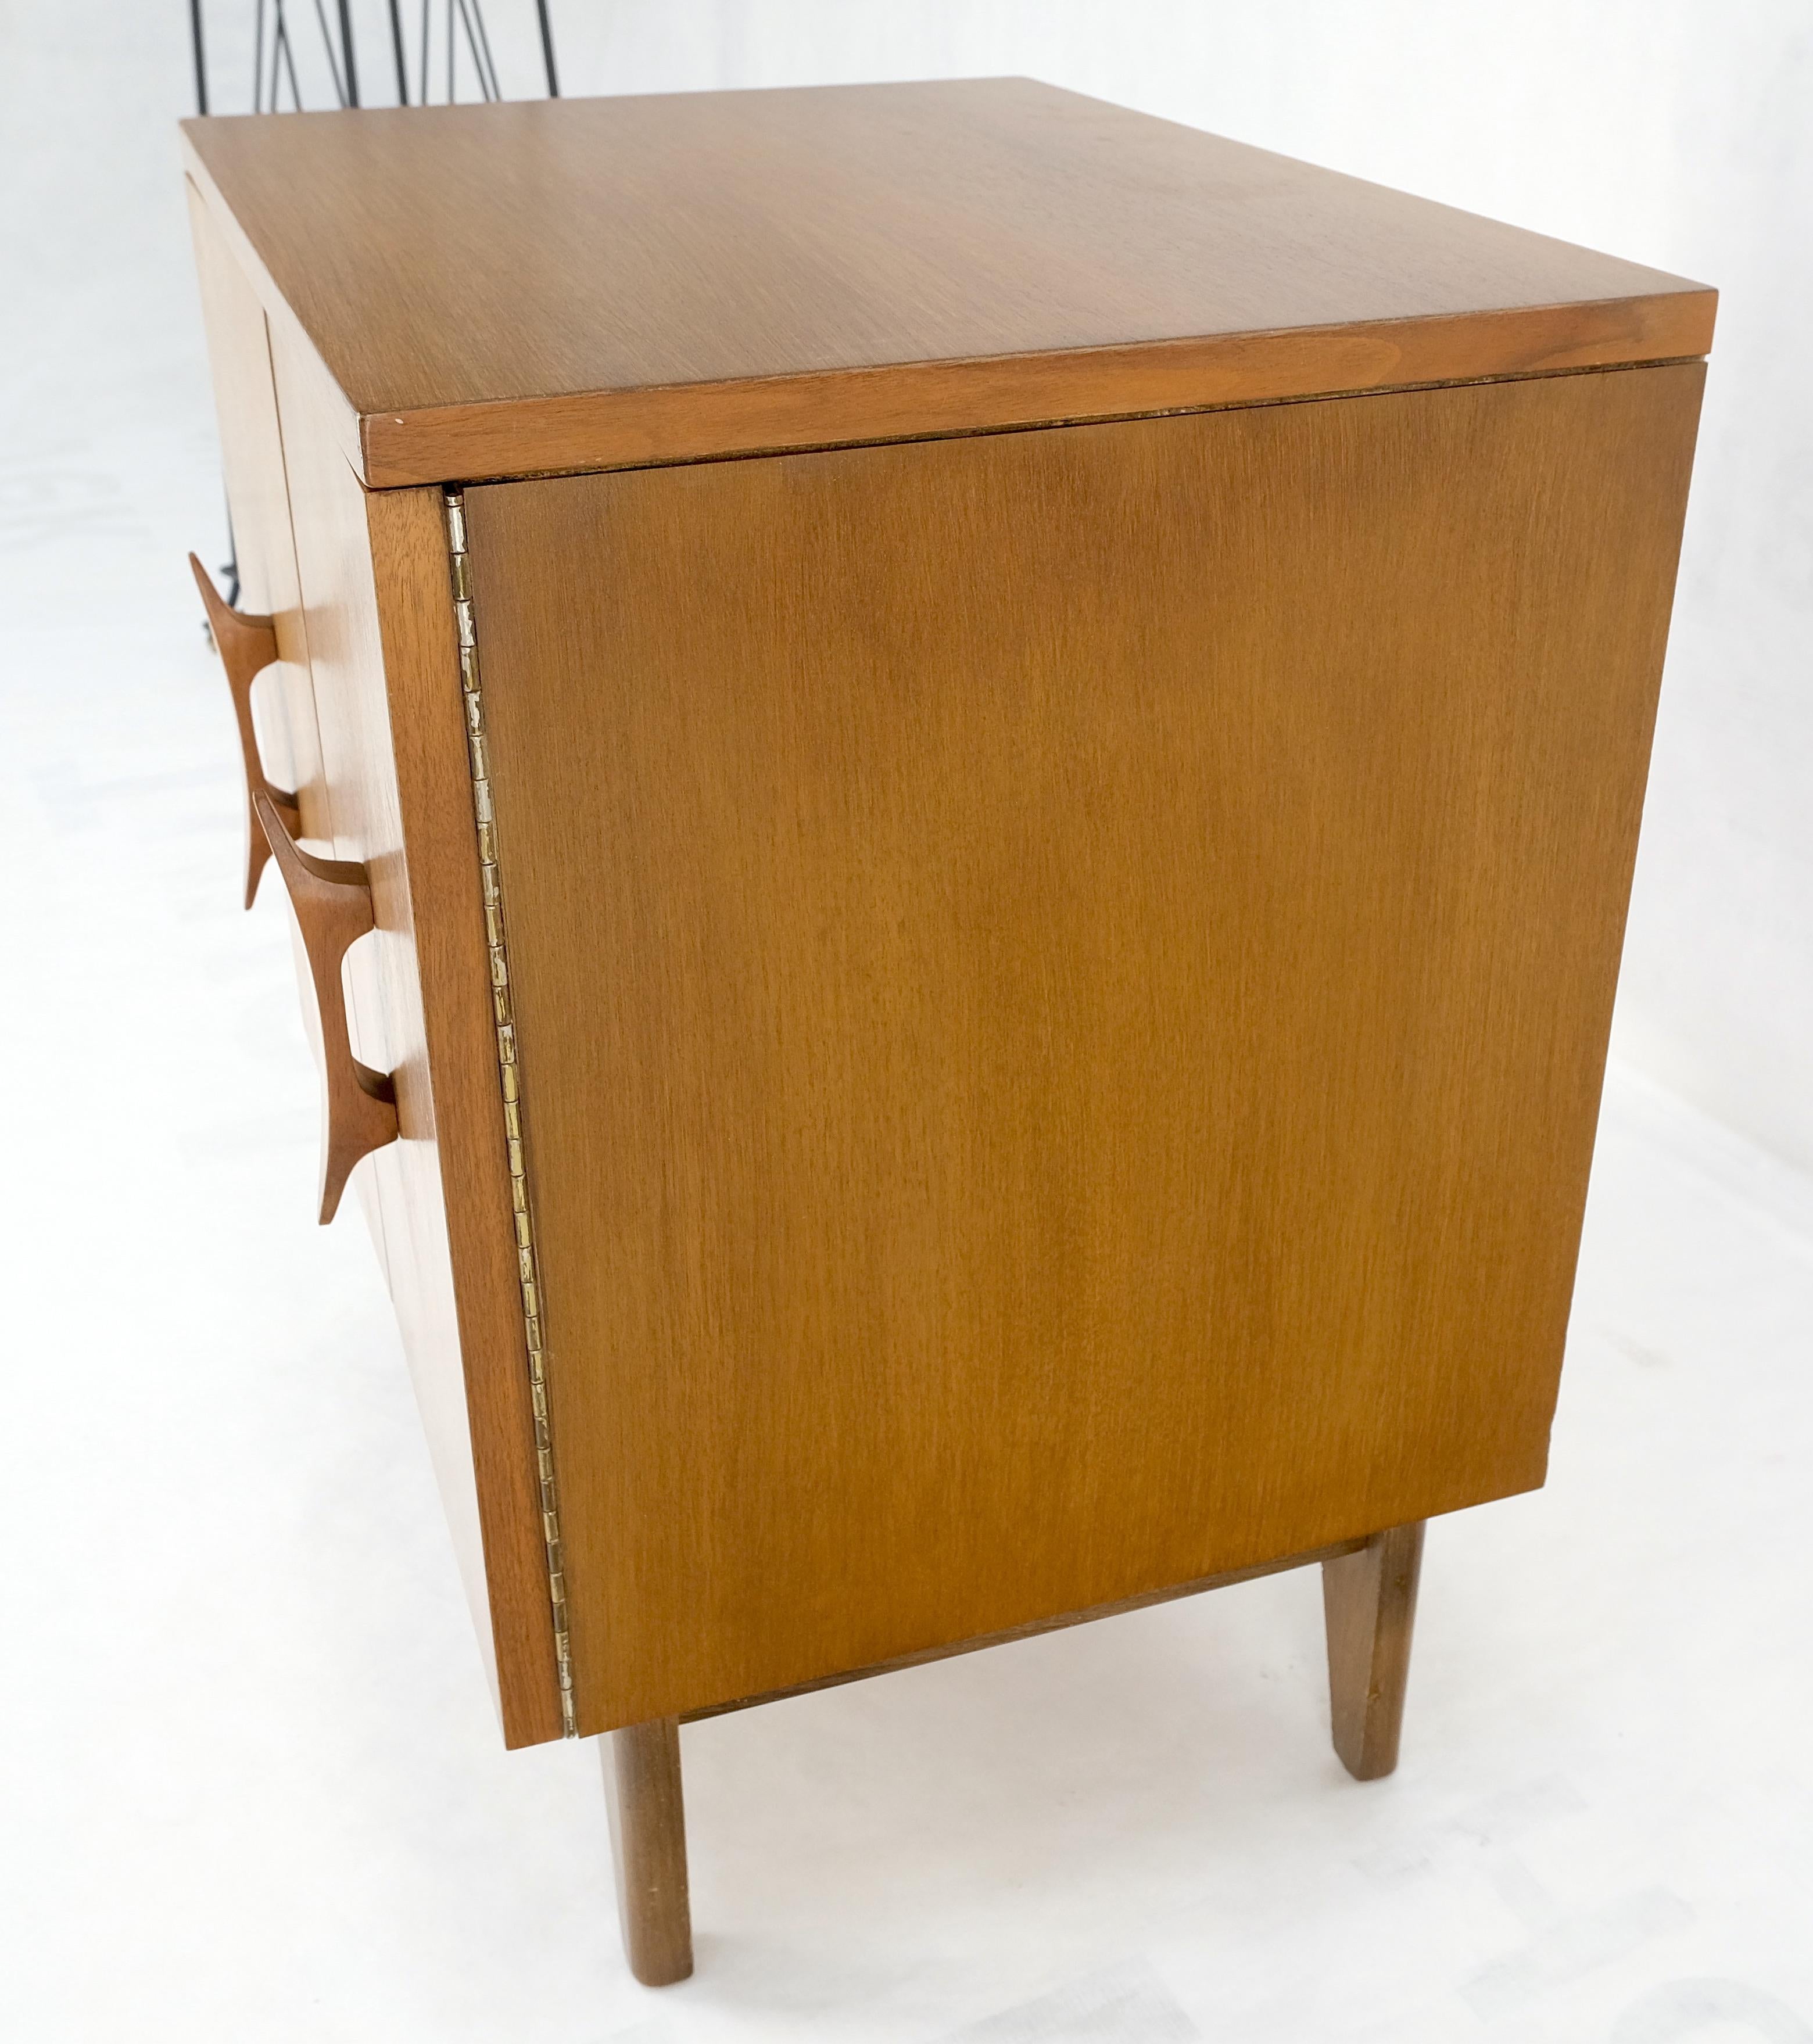 20th Century Light Walnut Banana Shape Pulls Two Doors End Table Nightstand Mint! For Sale